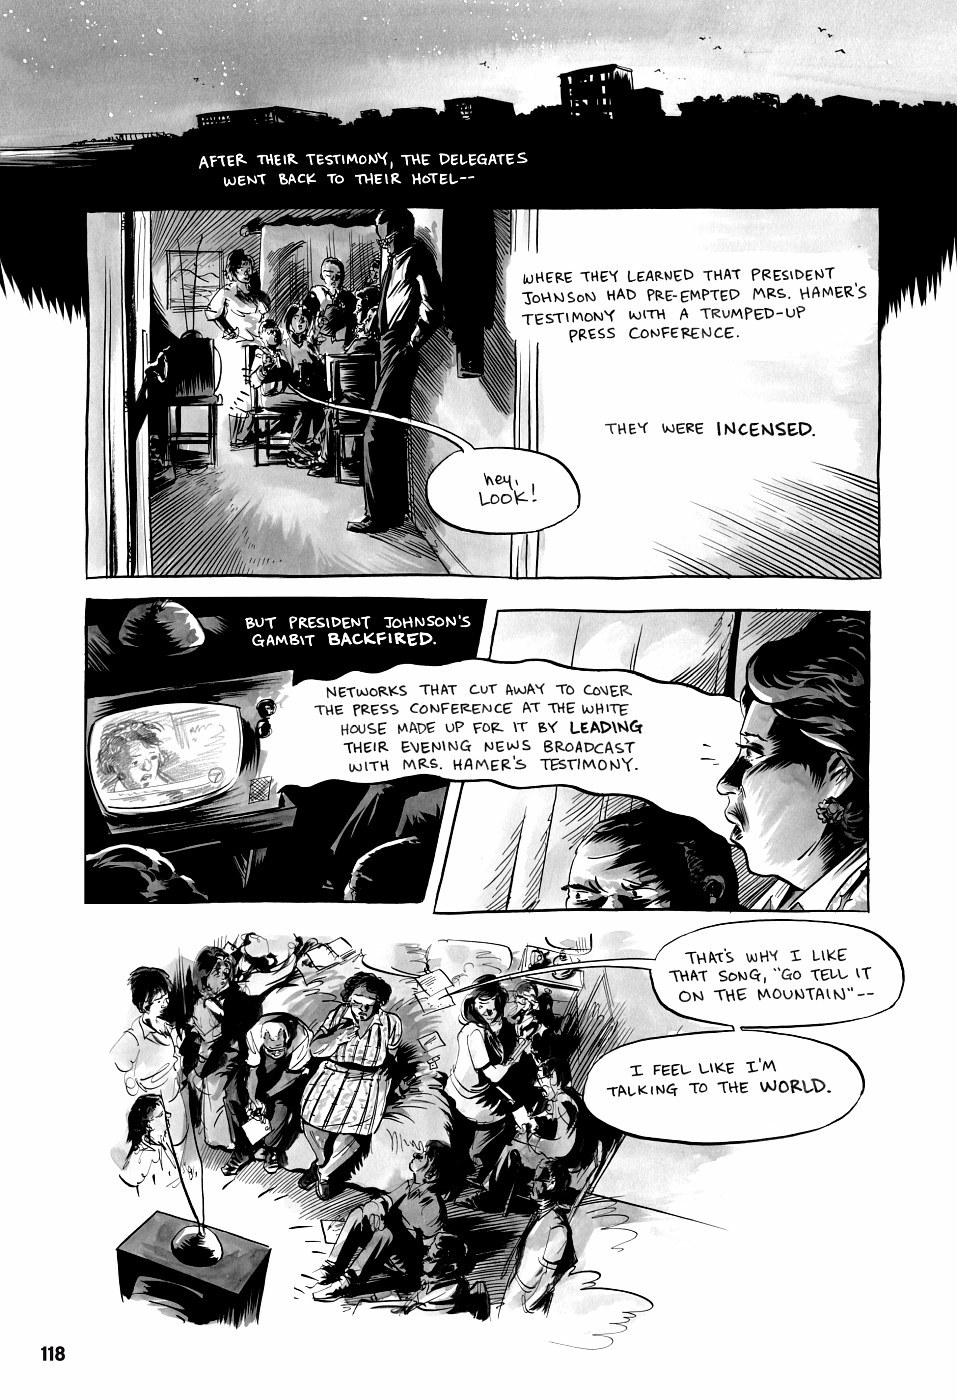 page 118 of march book three graphic novel